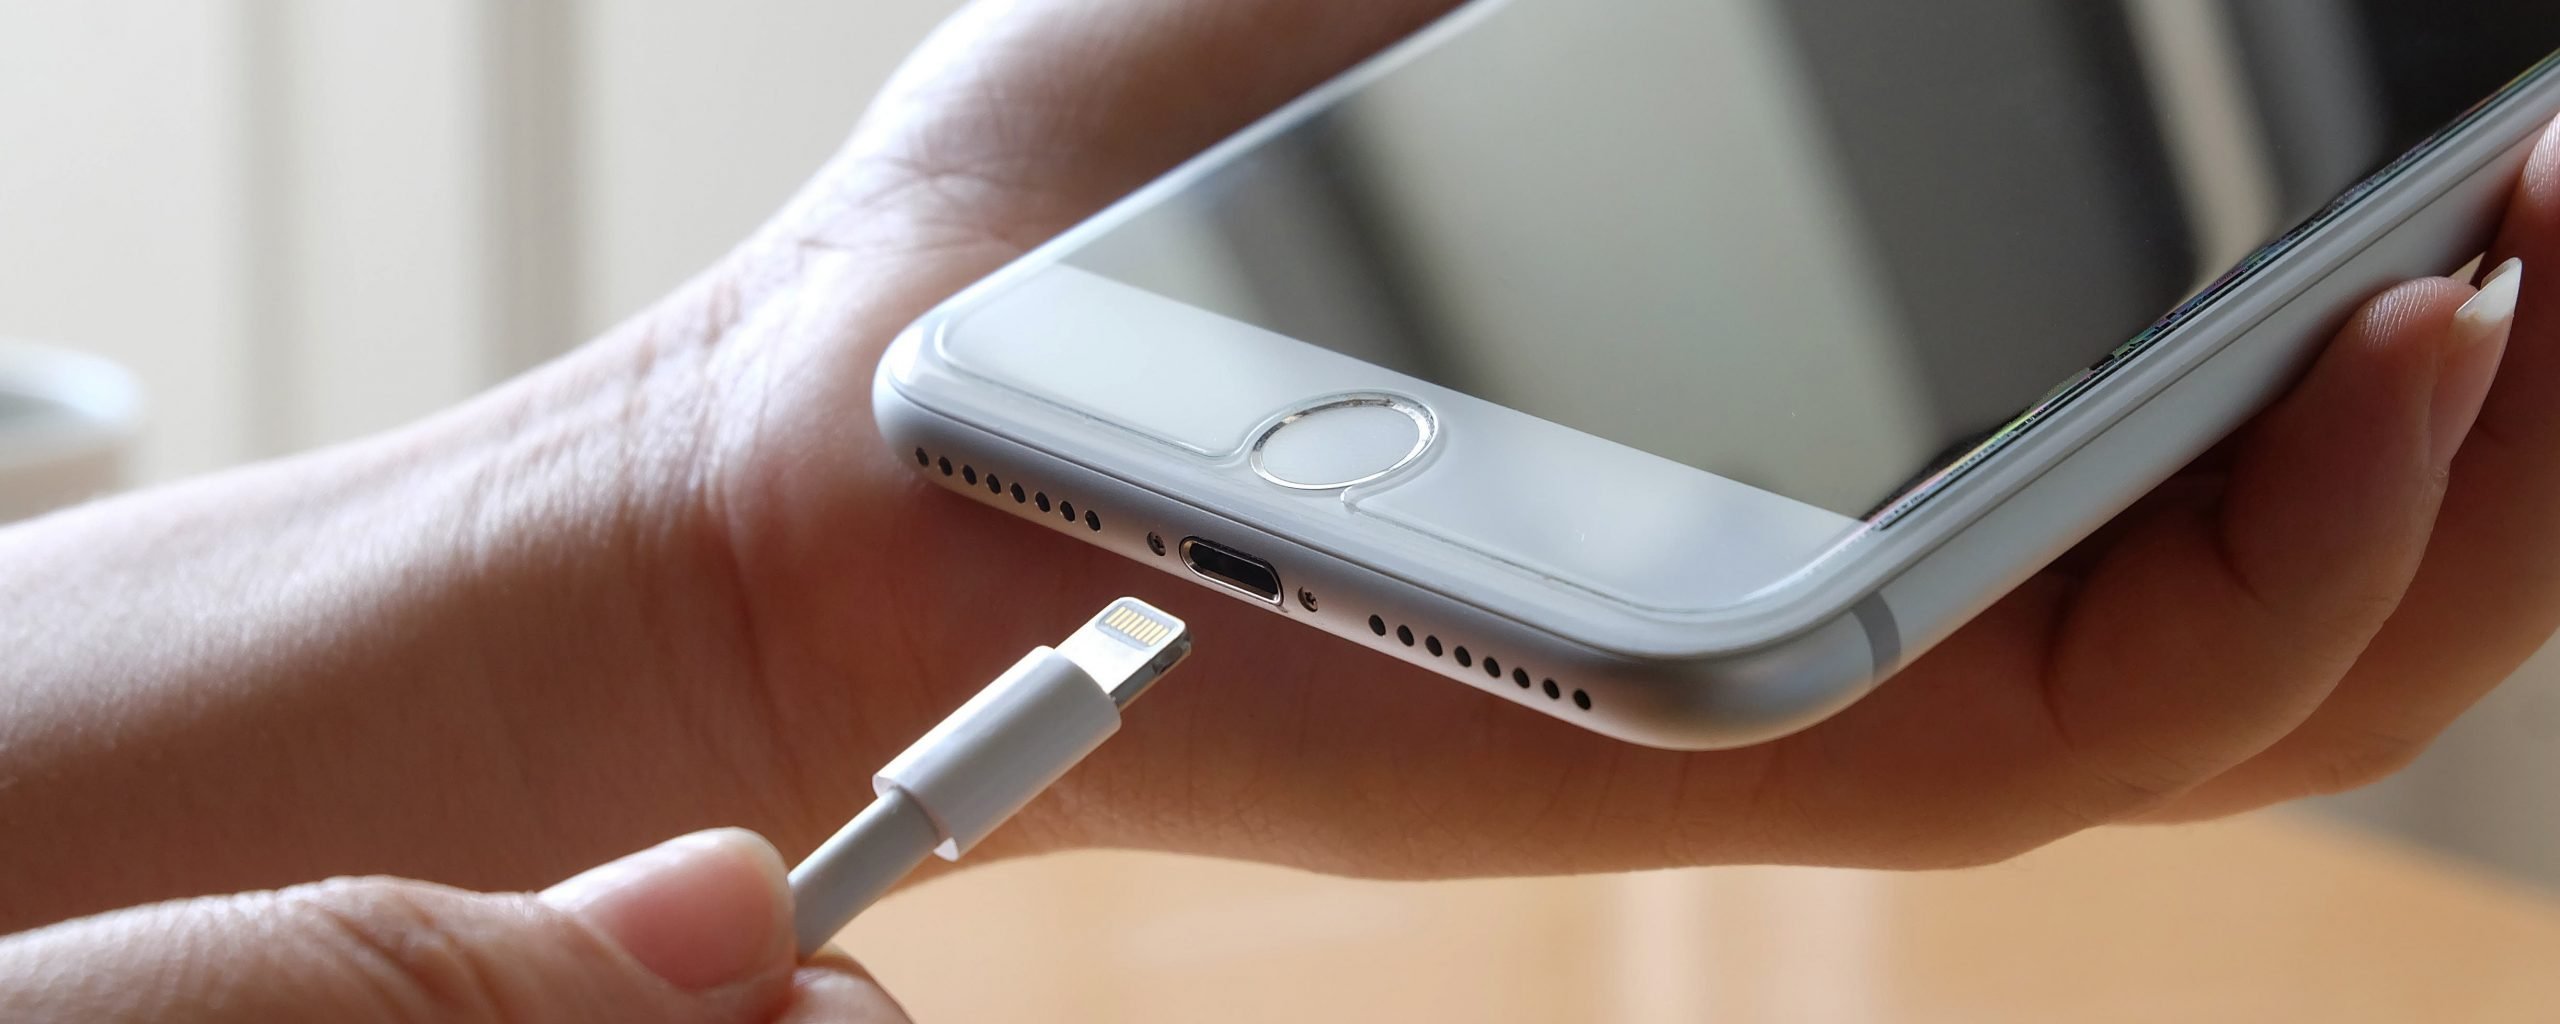 How to Tell If Your iPhone Is Charging When Its On or Off